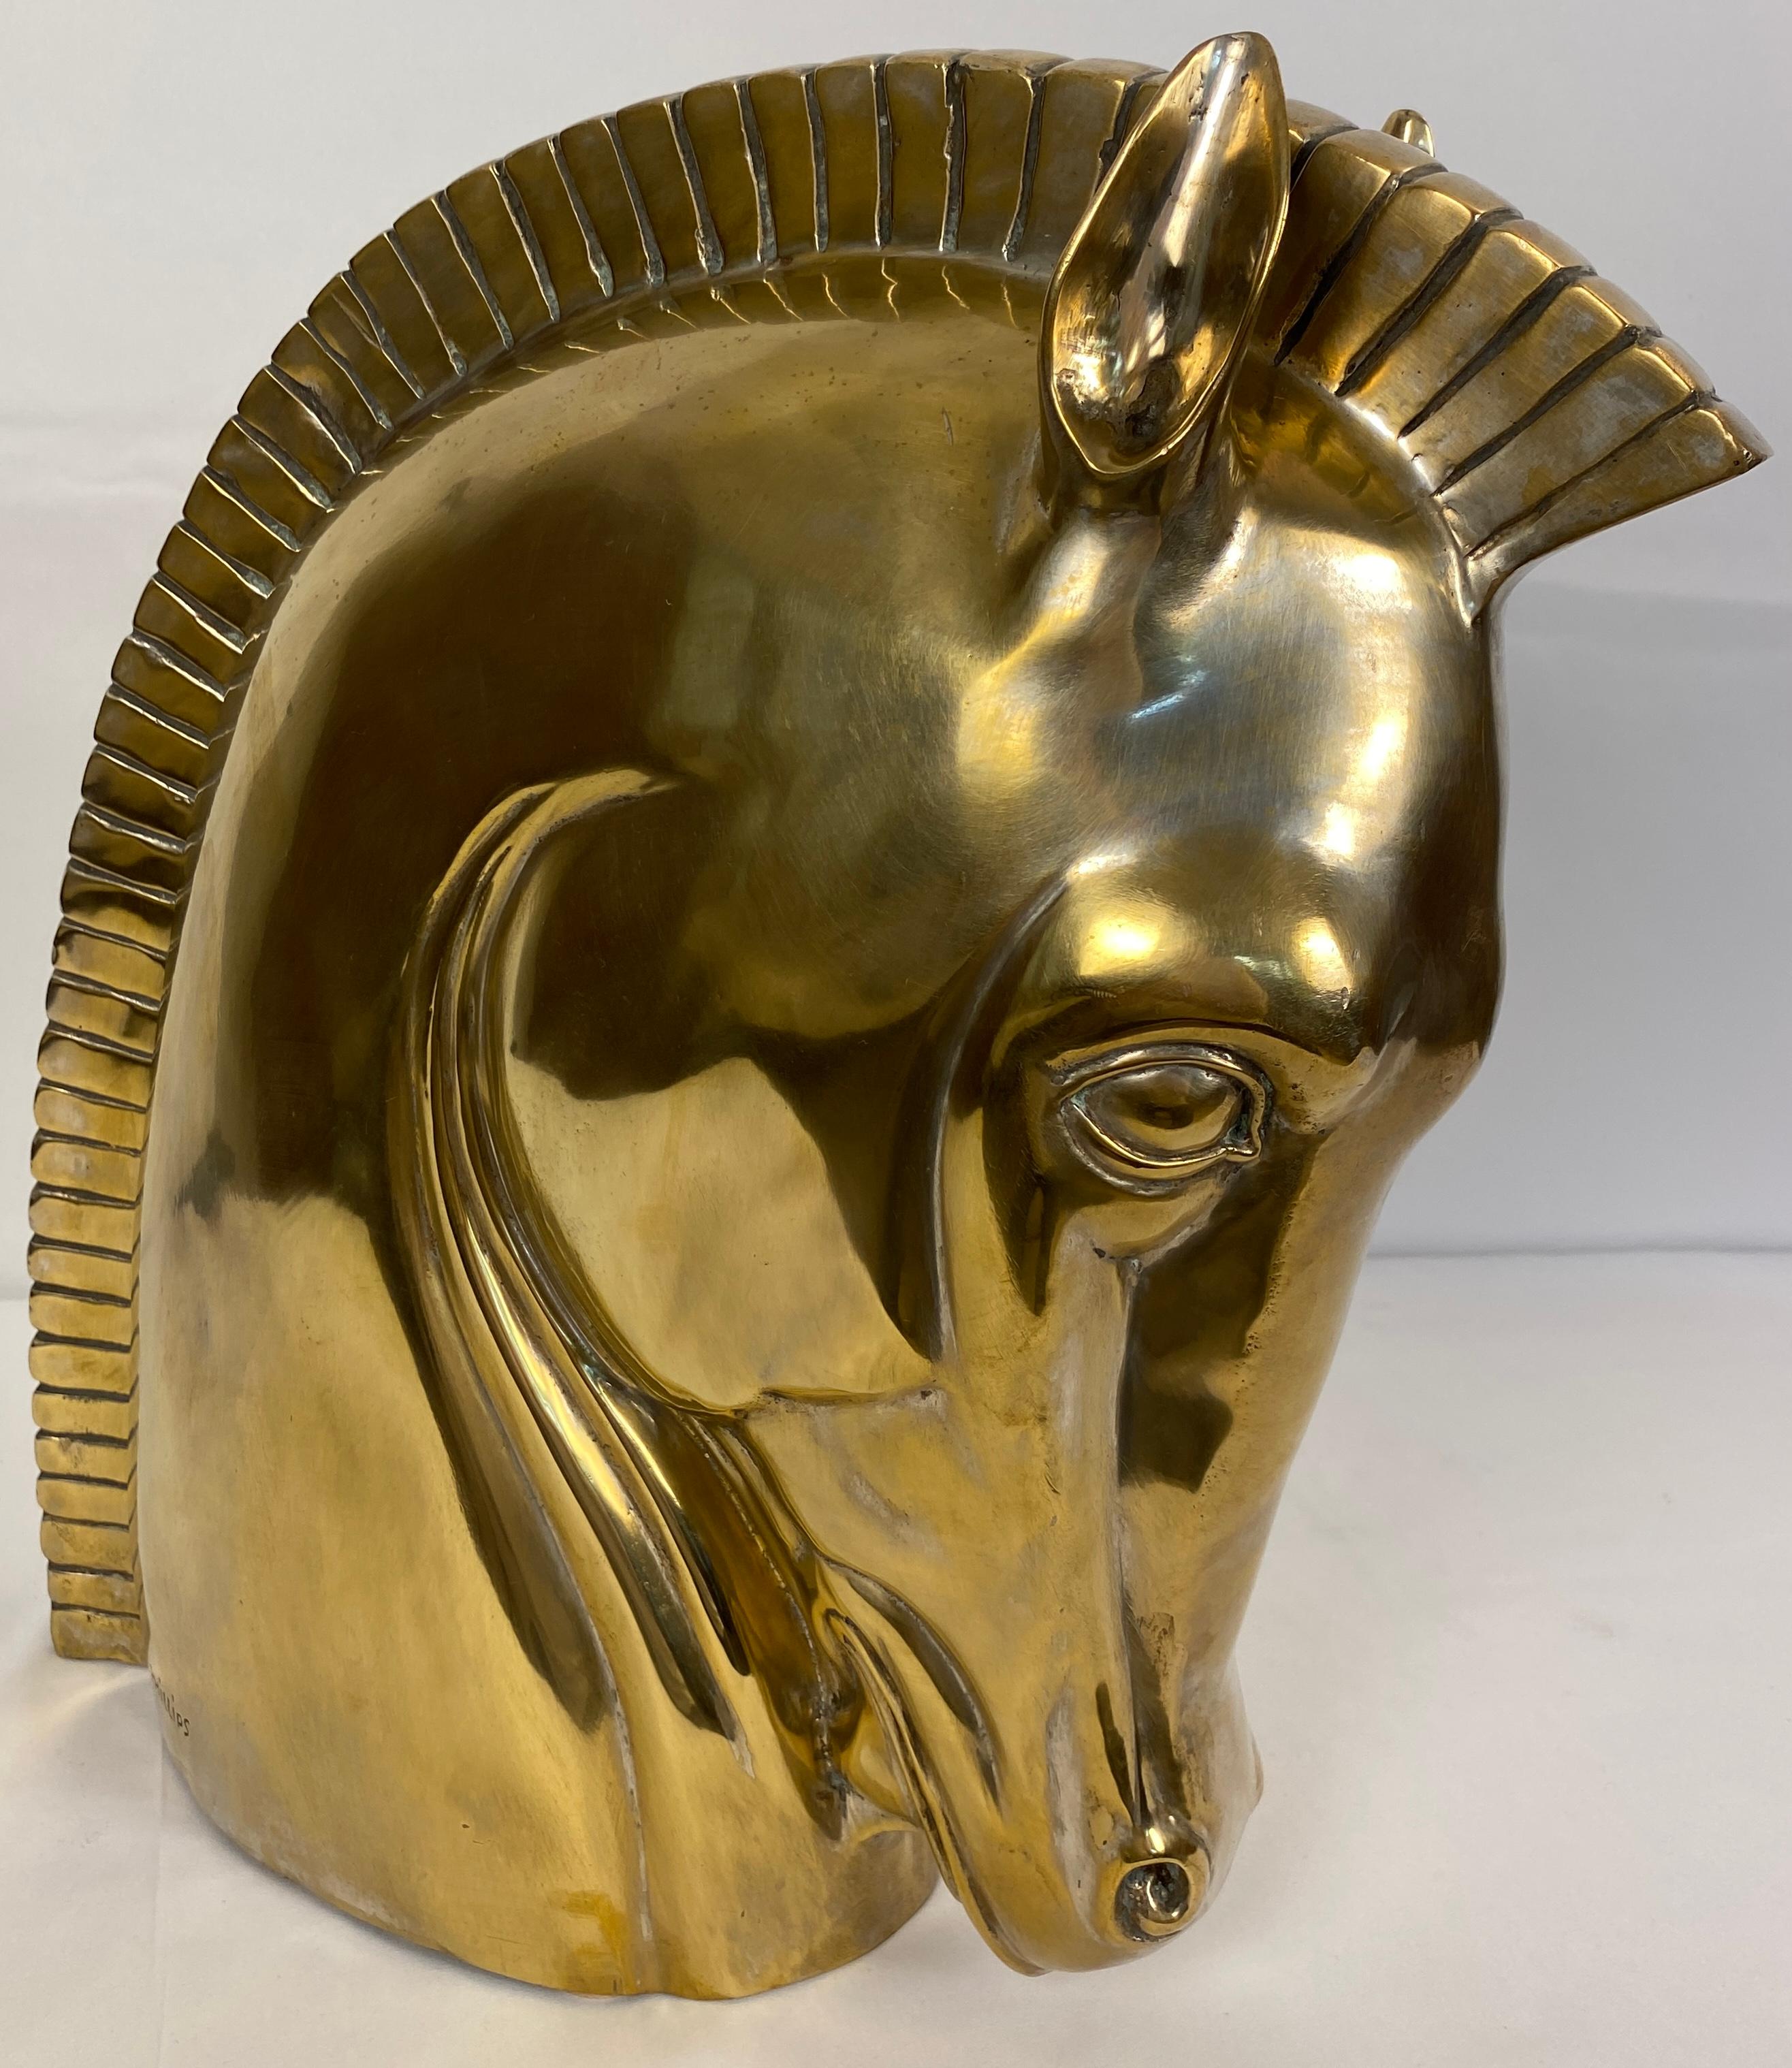 A stunning modern design of a bronze trojan horse head.
Made of cast bronze with a beautiful patina consistent with age.
Signed Phillips. 

This bronze trojan horse head sculpture will enhance any modern or contemporary setting. Delightfully heavy,